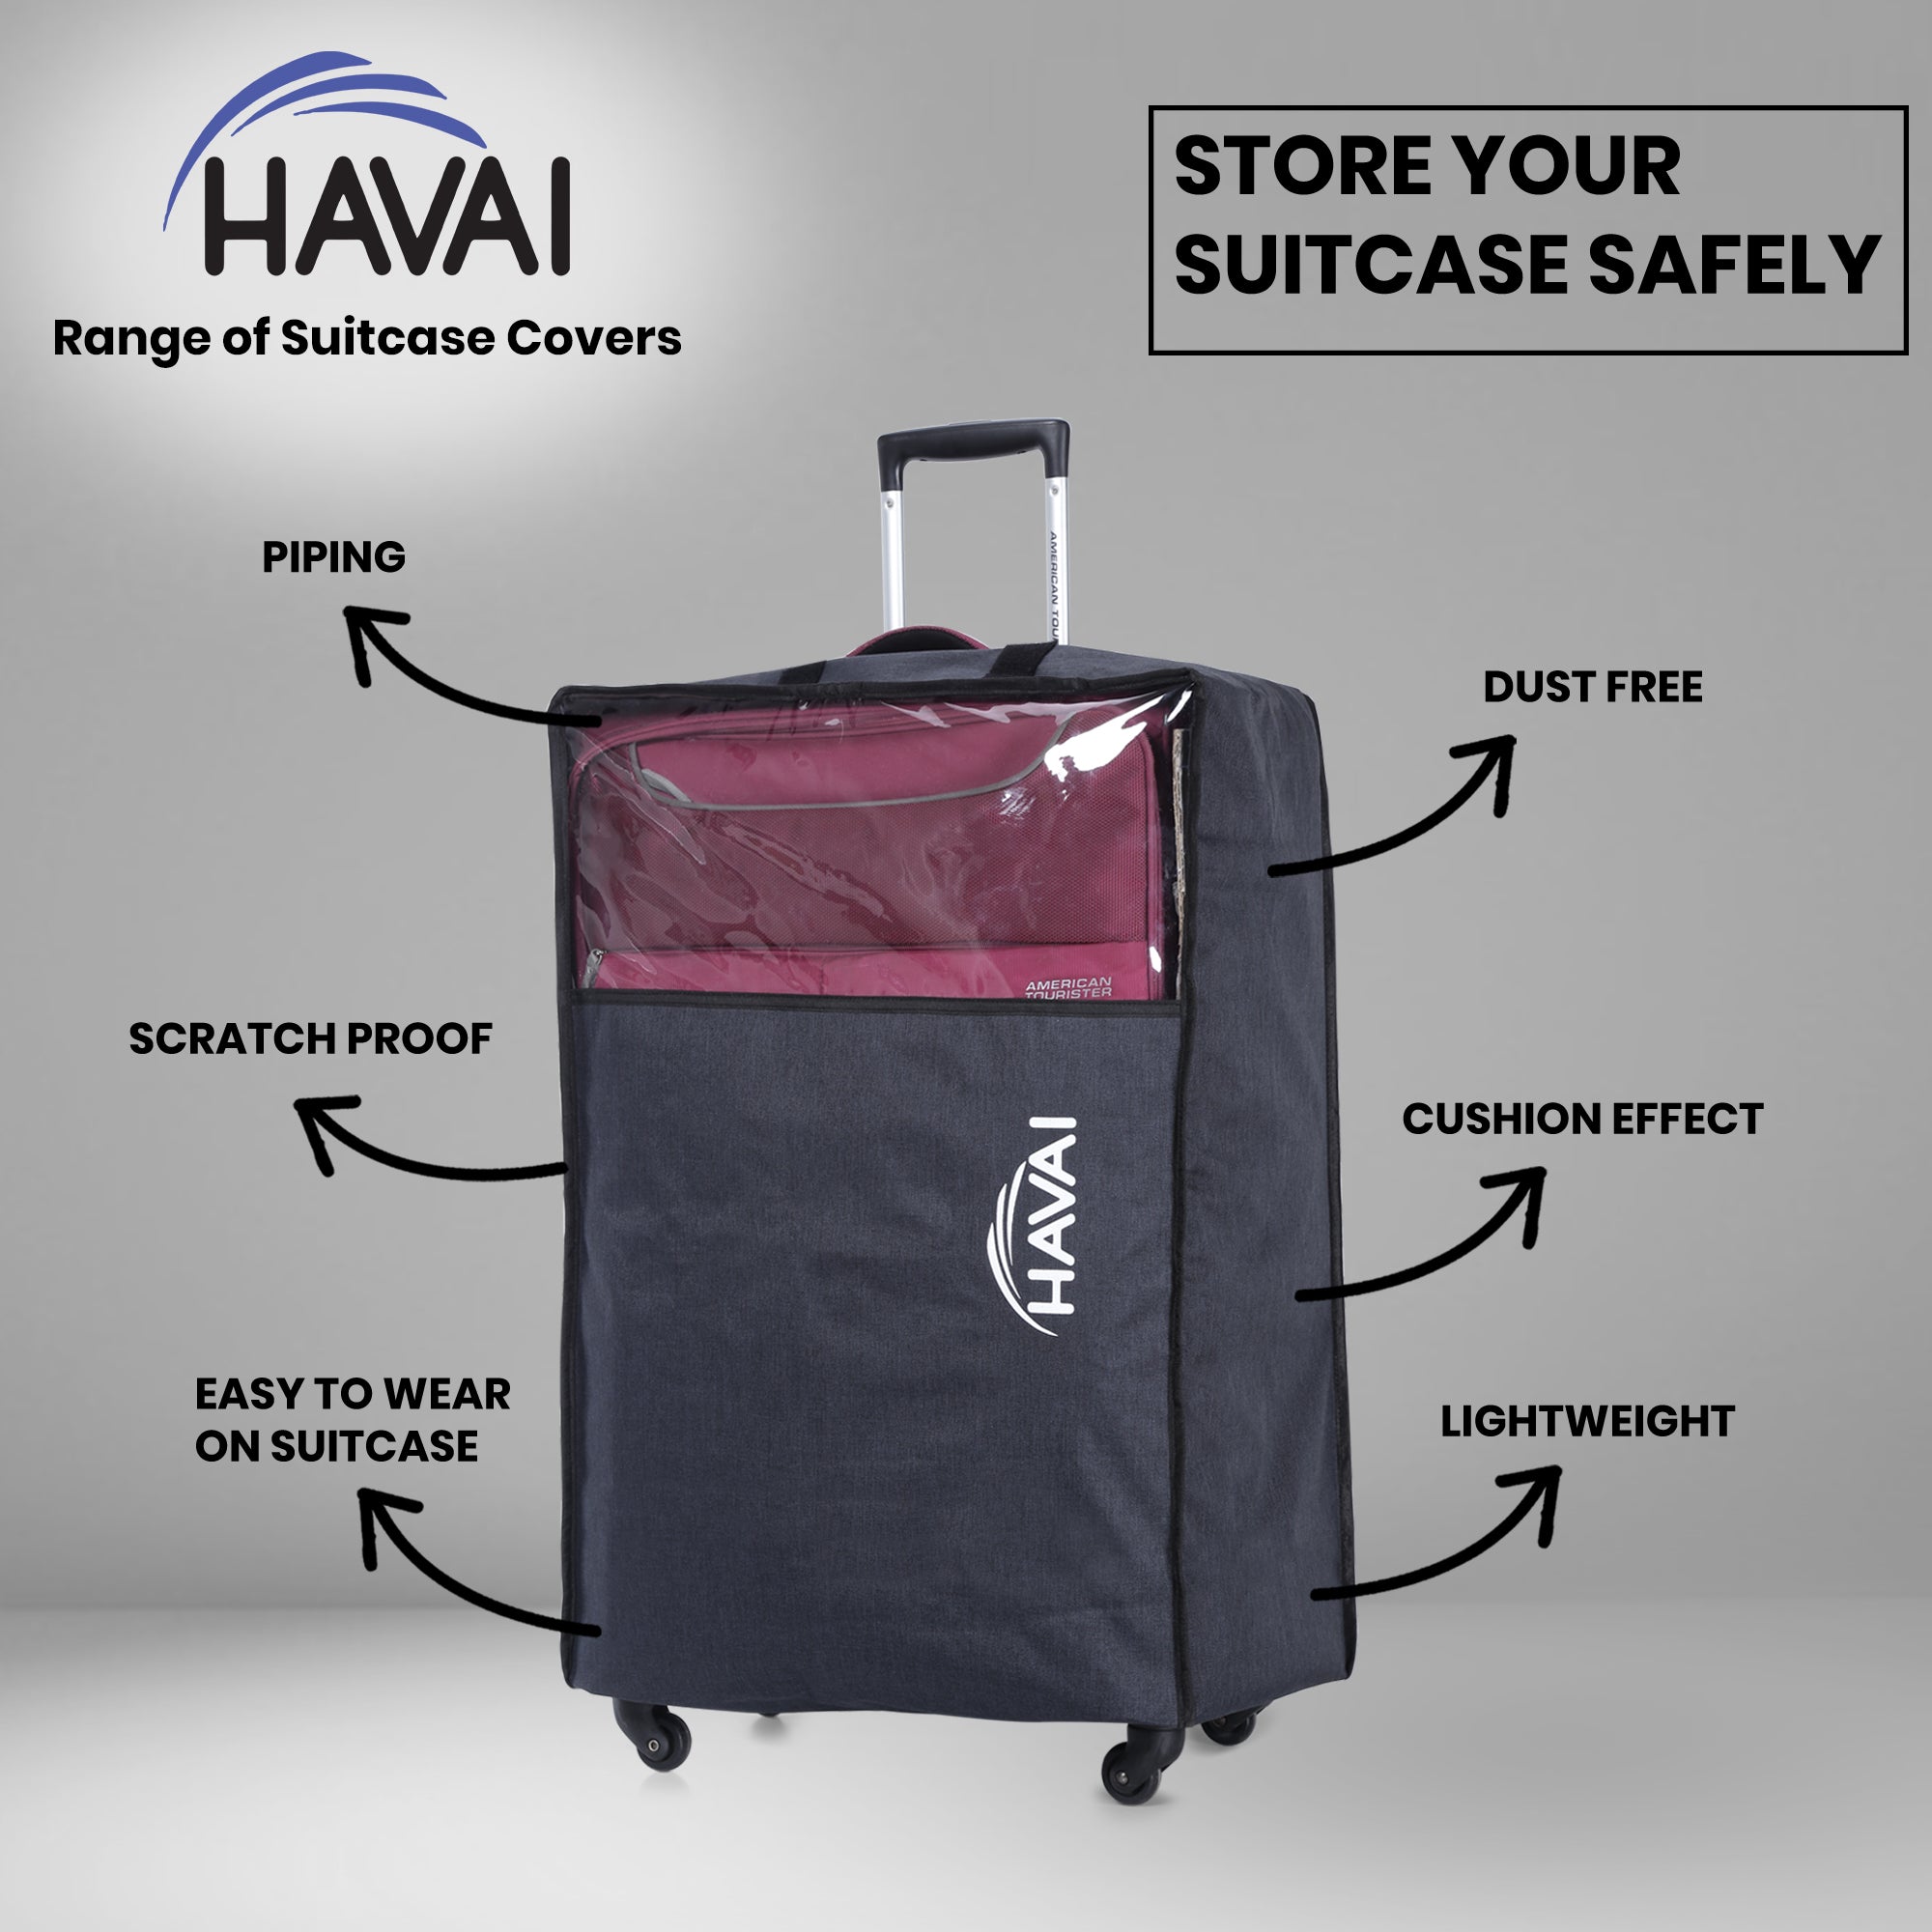 HAVAI Suitcase Storage Protector - Store your suitcase Safely (28 Inch), Navy Blue, Pack of 1